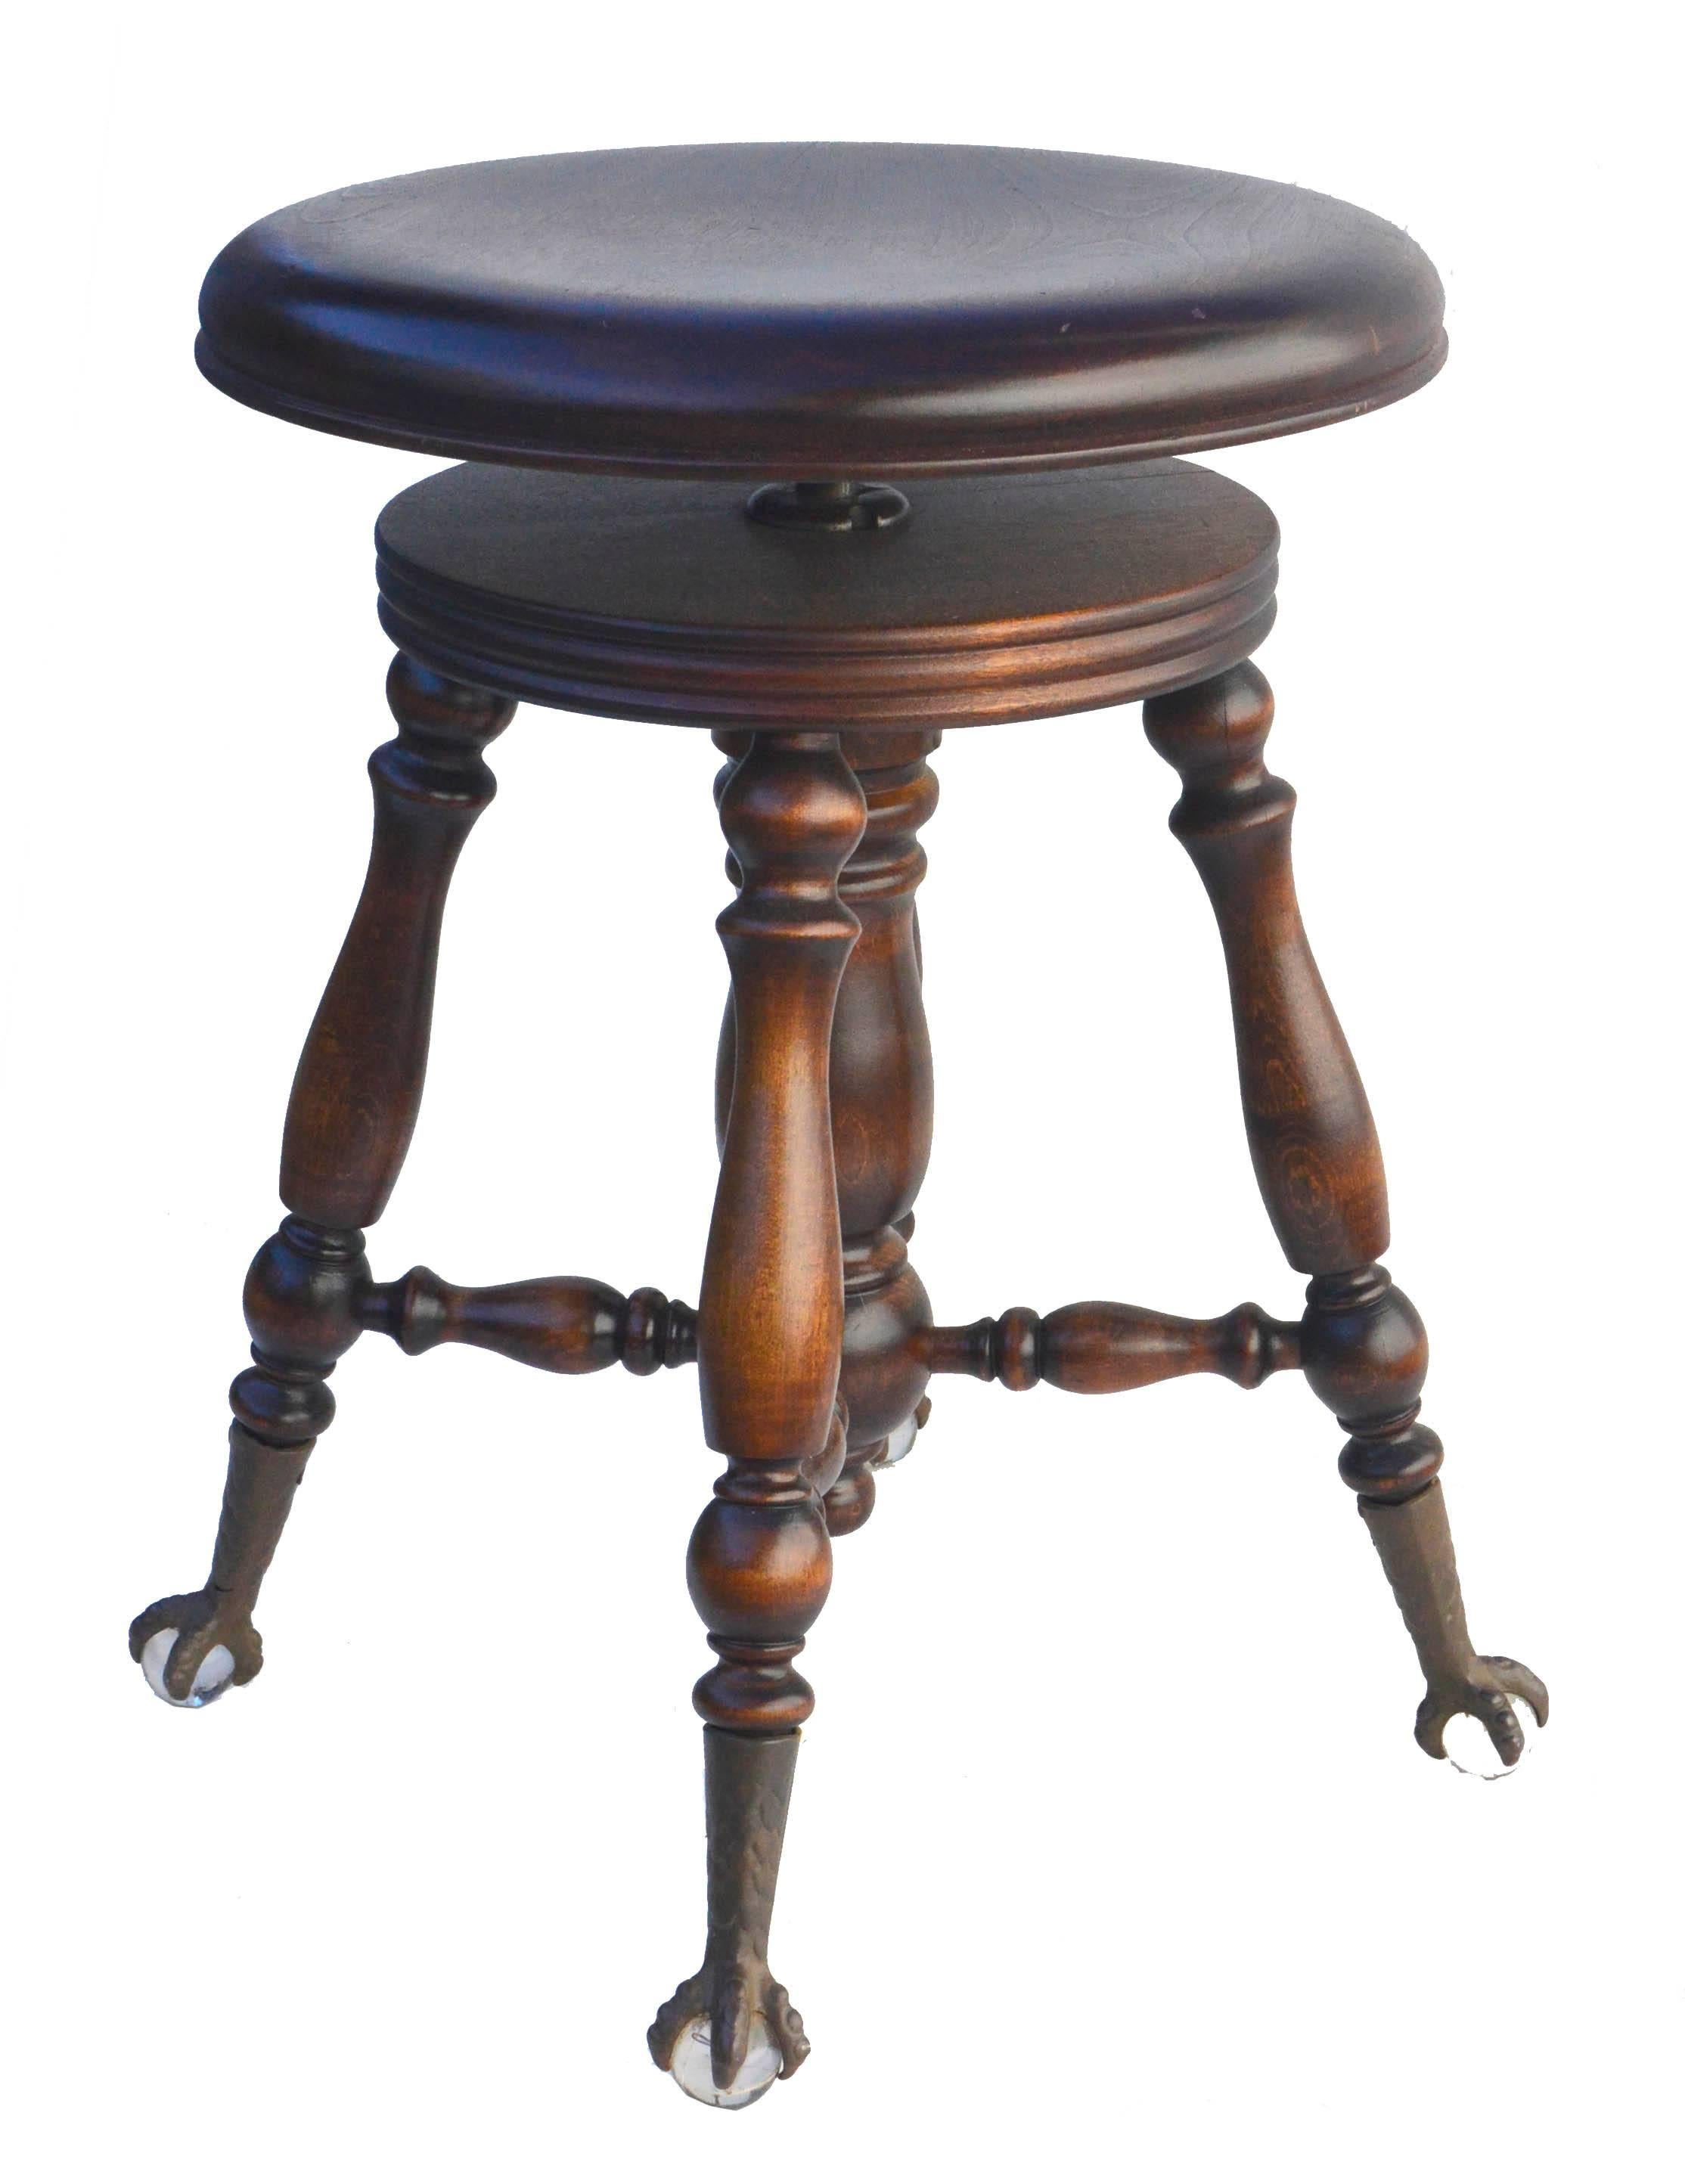 Gorgeous and rare piano stool with marvelous details and rich mahogany patina, this A. Merriam & Co piano stool has an adjustable-height seat with 